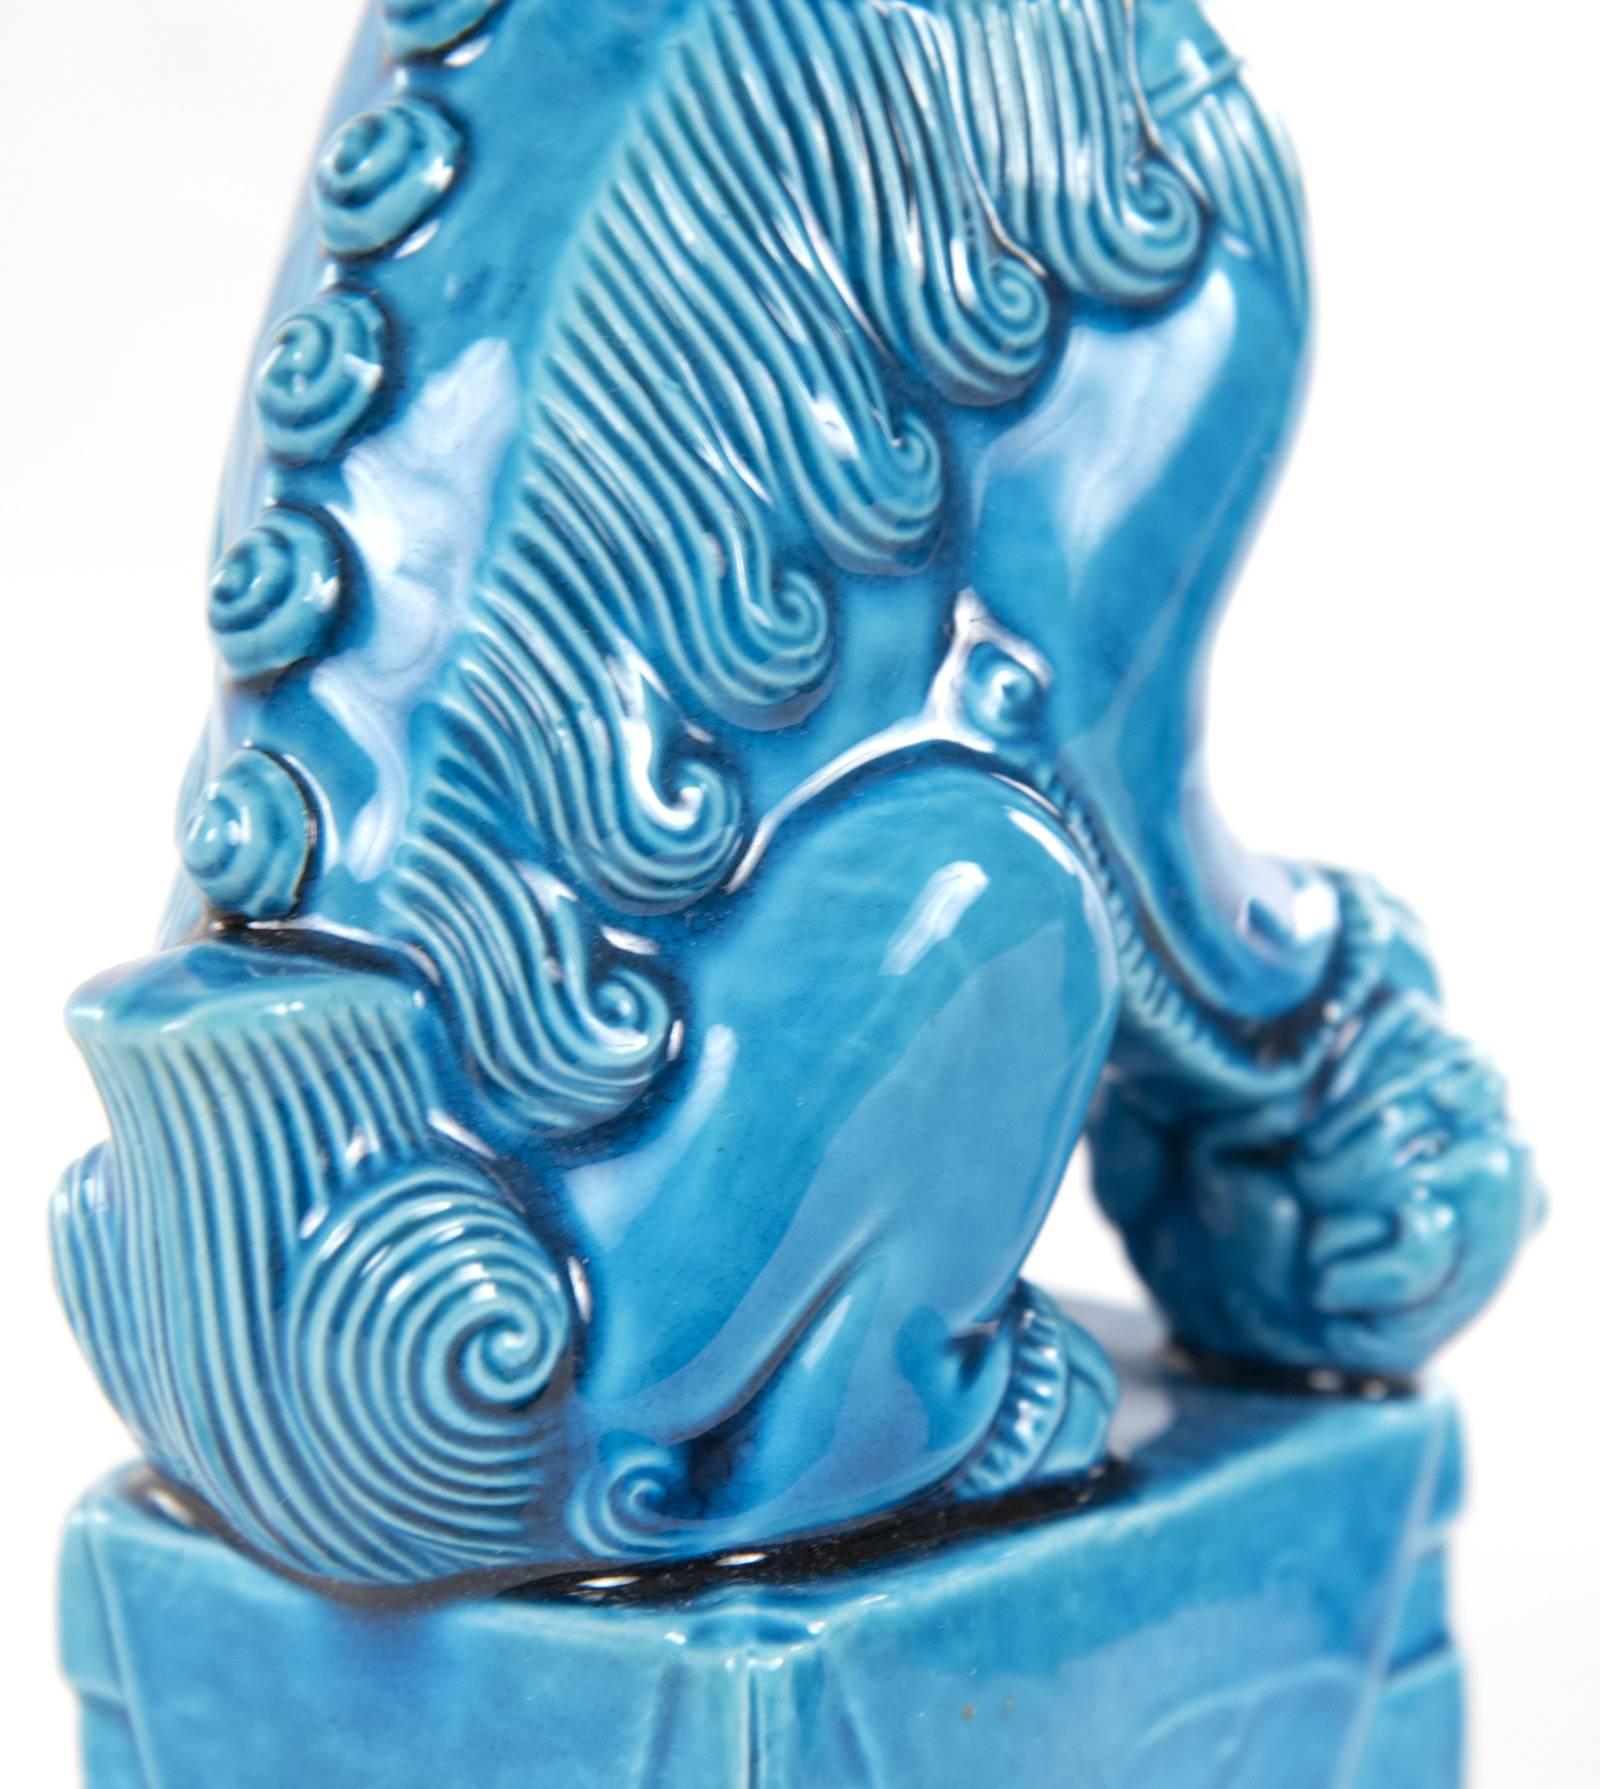 Taiwanese Pair of Turquoise-Glazed Porcelain Chinese Foo Dogs